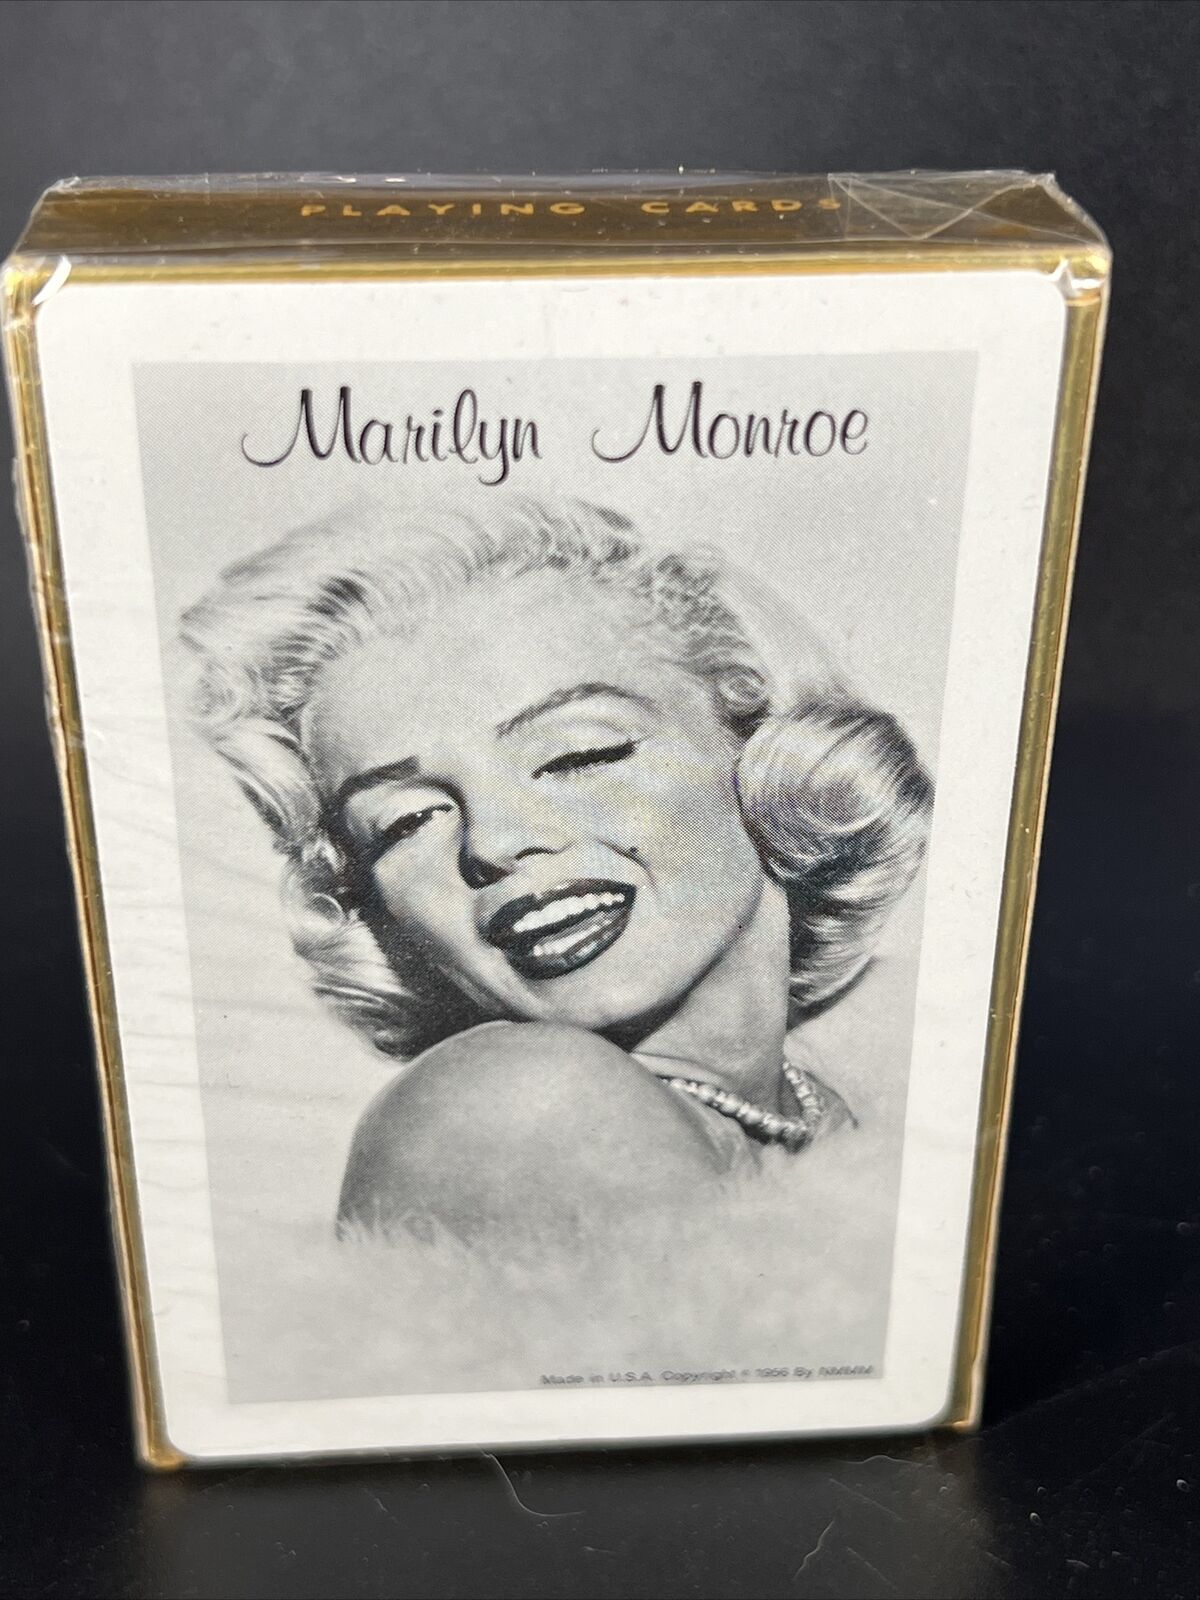 1956 Marilyn Monroe Playing Cards Deck Sealed Frank Powolny Fur & Pearls by NMMM